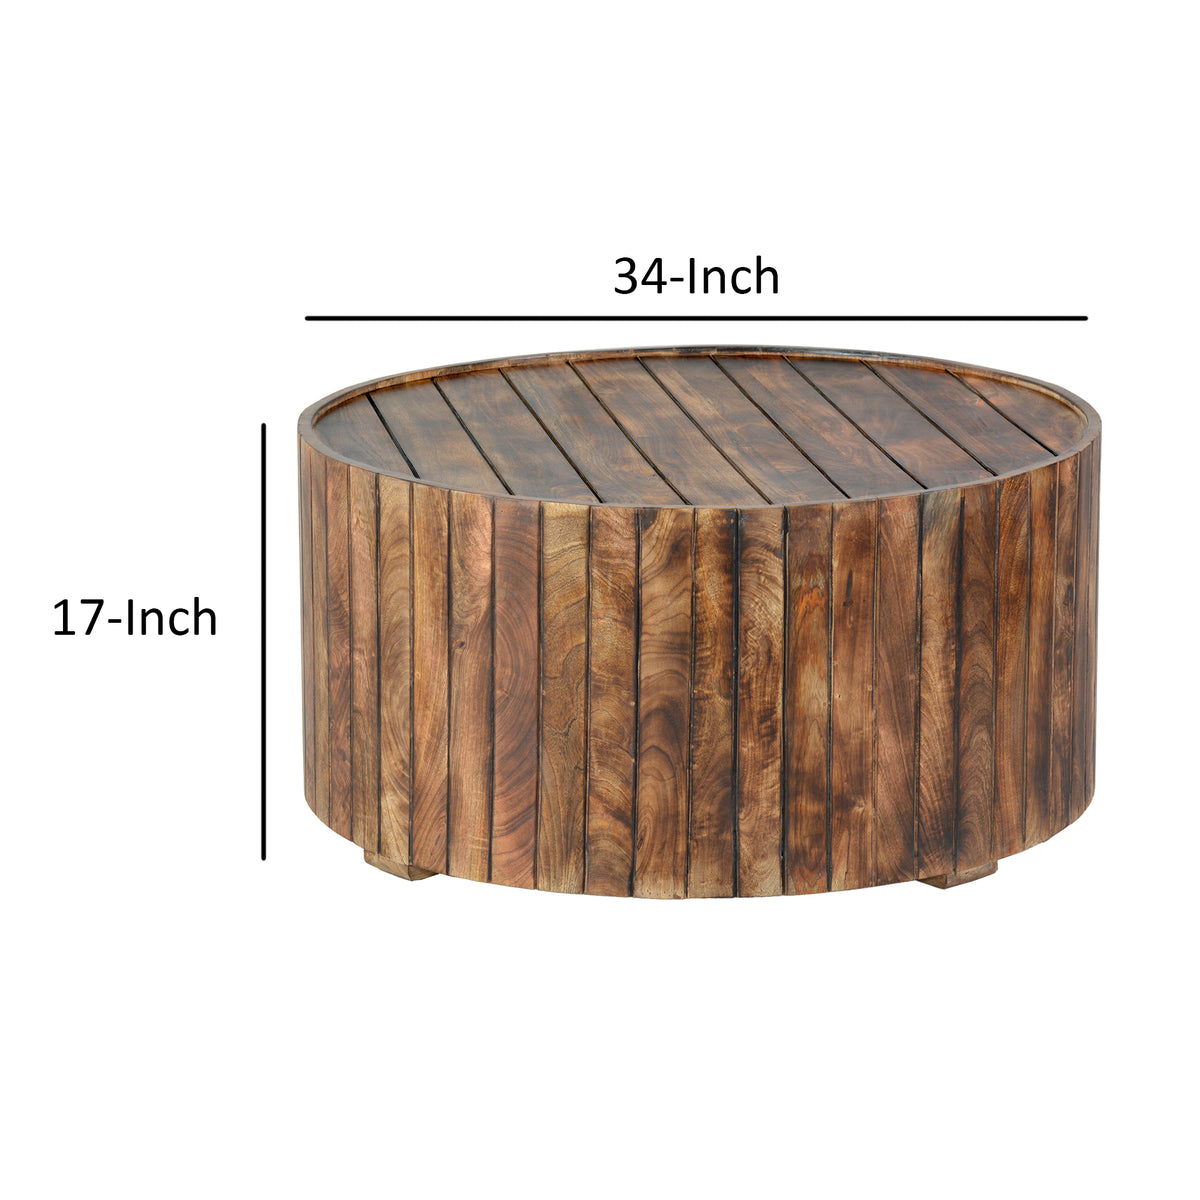 34 Inch Handmade Wooden Round Coffee Table with Plank Design, Burned Brown - UPT-204785